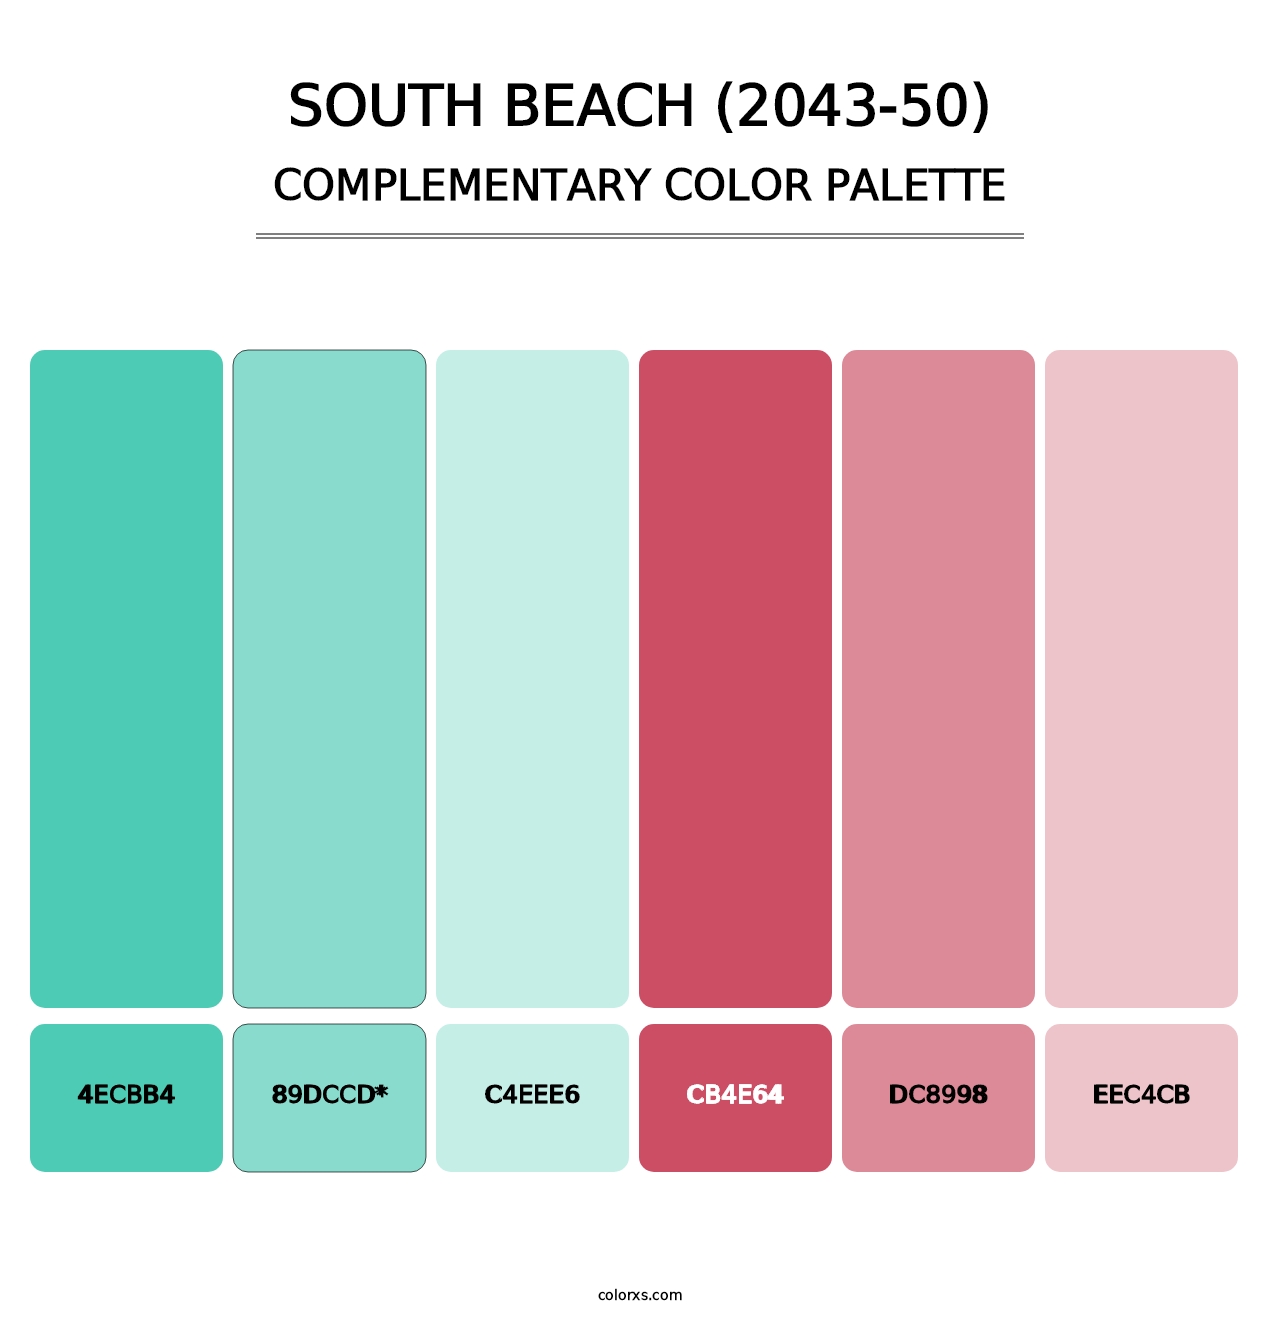 South Beach (2043-50) - Complementary Color Palette